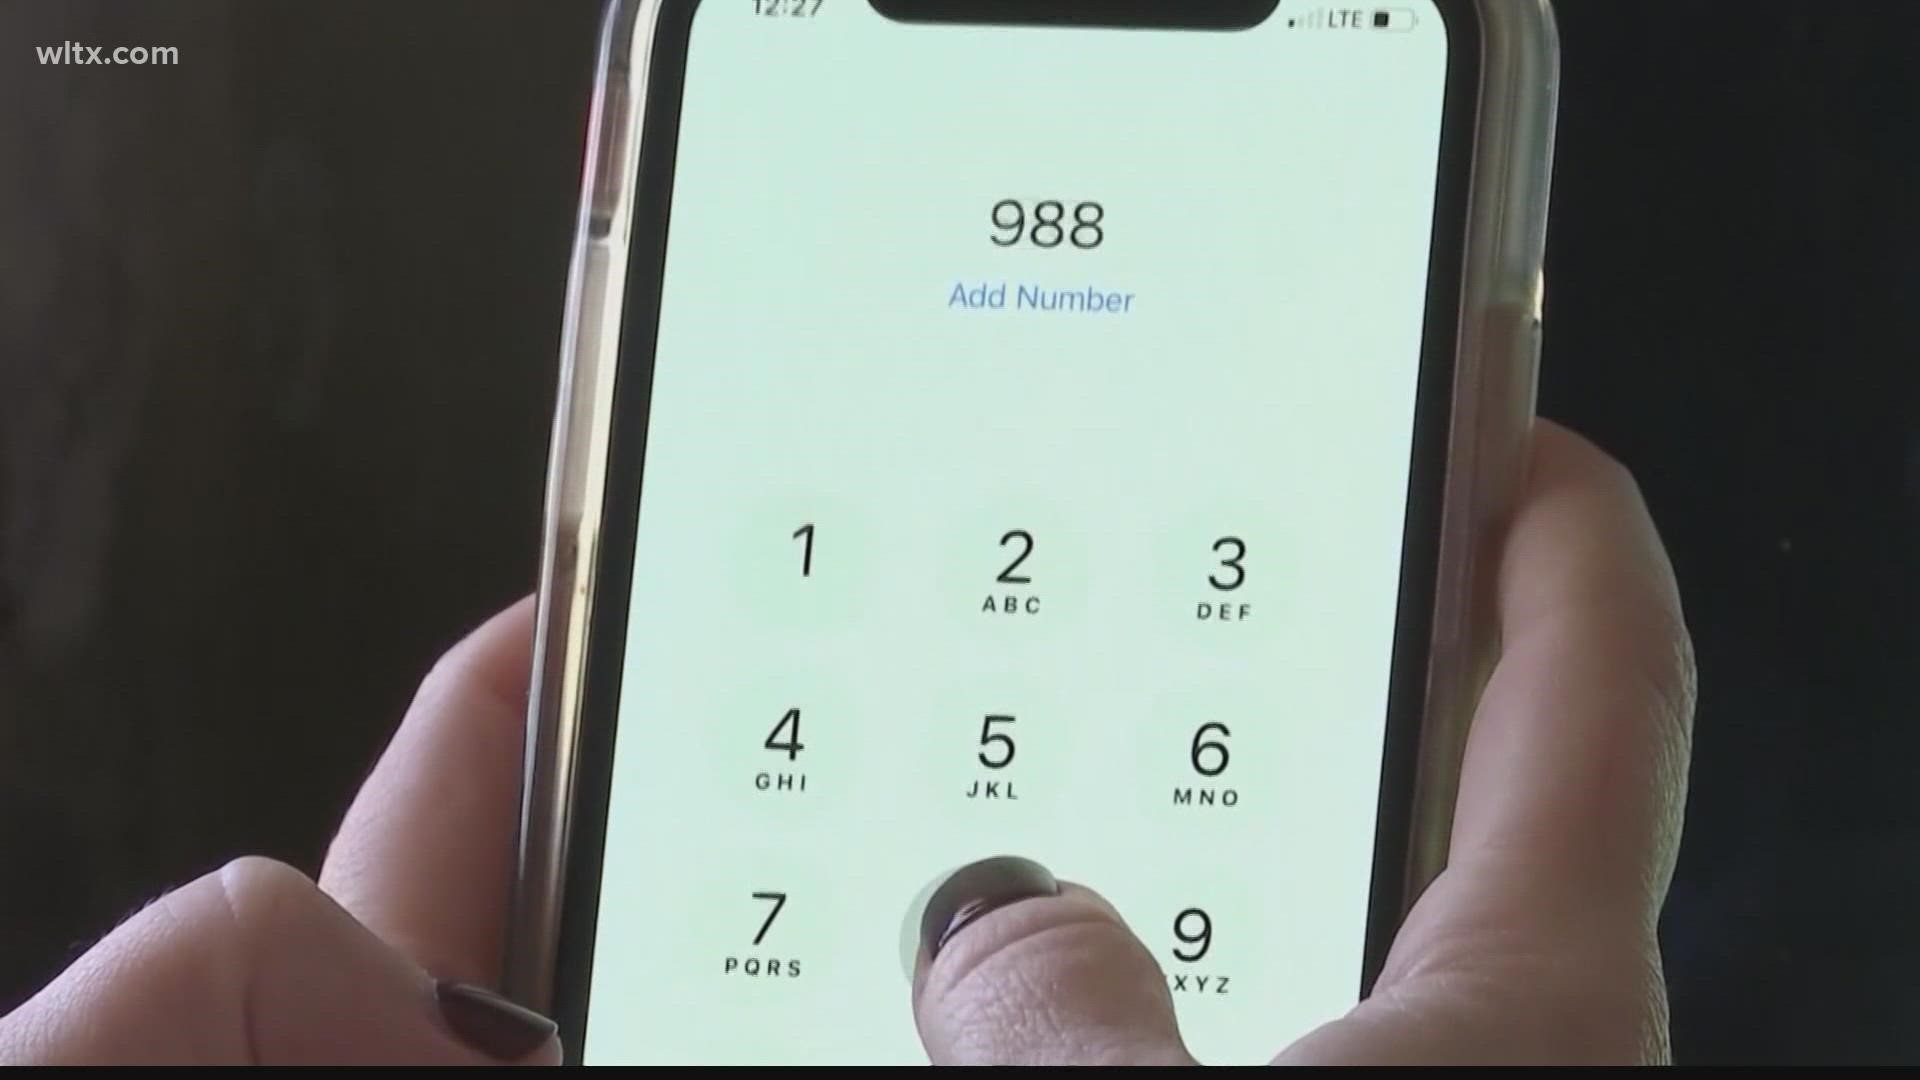 The new three digit number is replacing the longer 1-800 number connected to the National Suicide Prevention Lifeline.